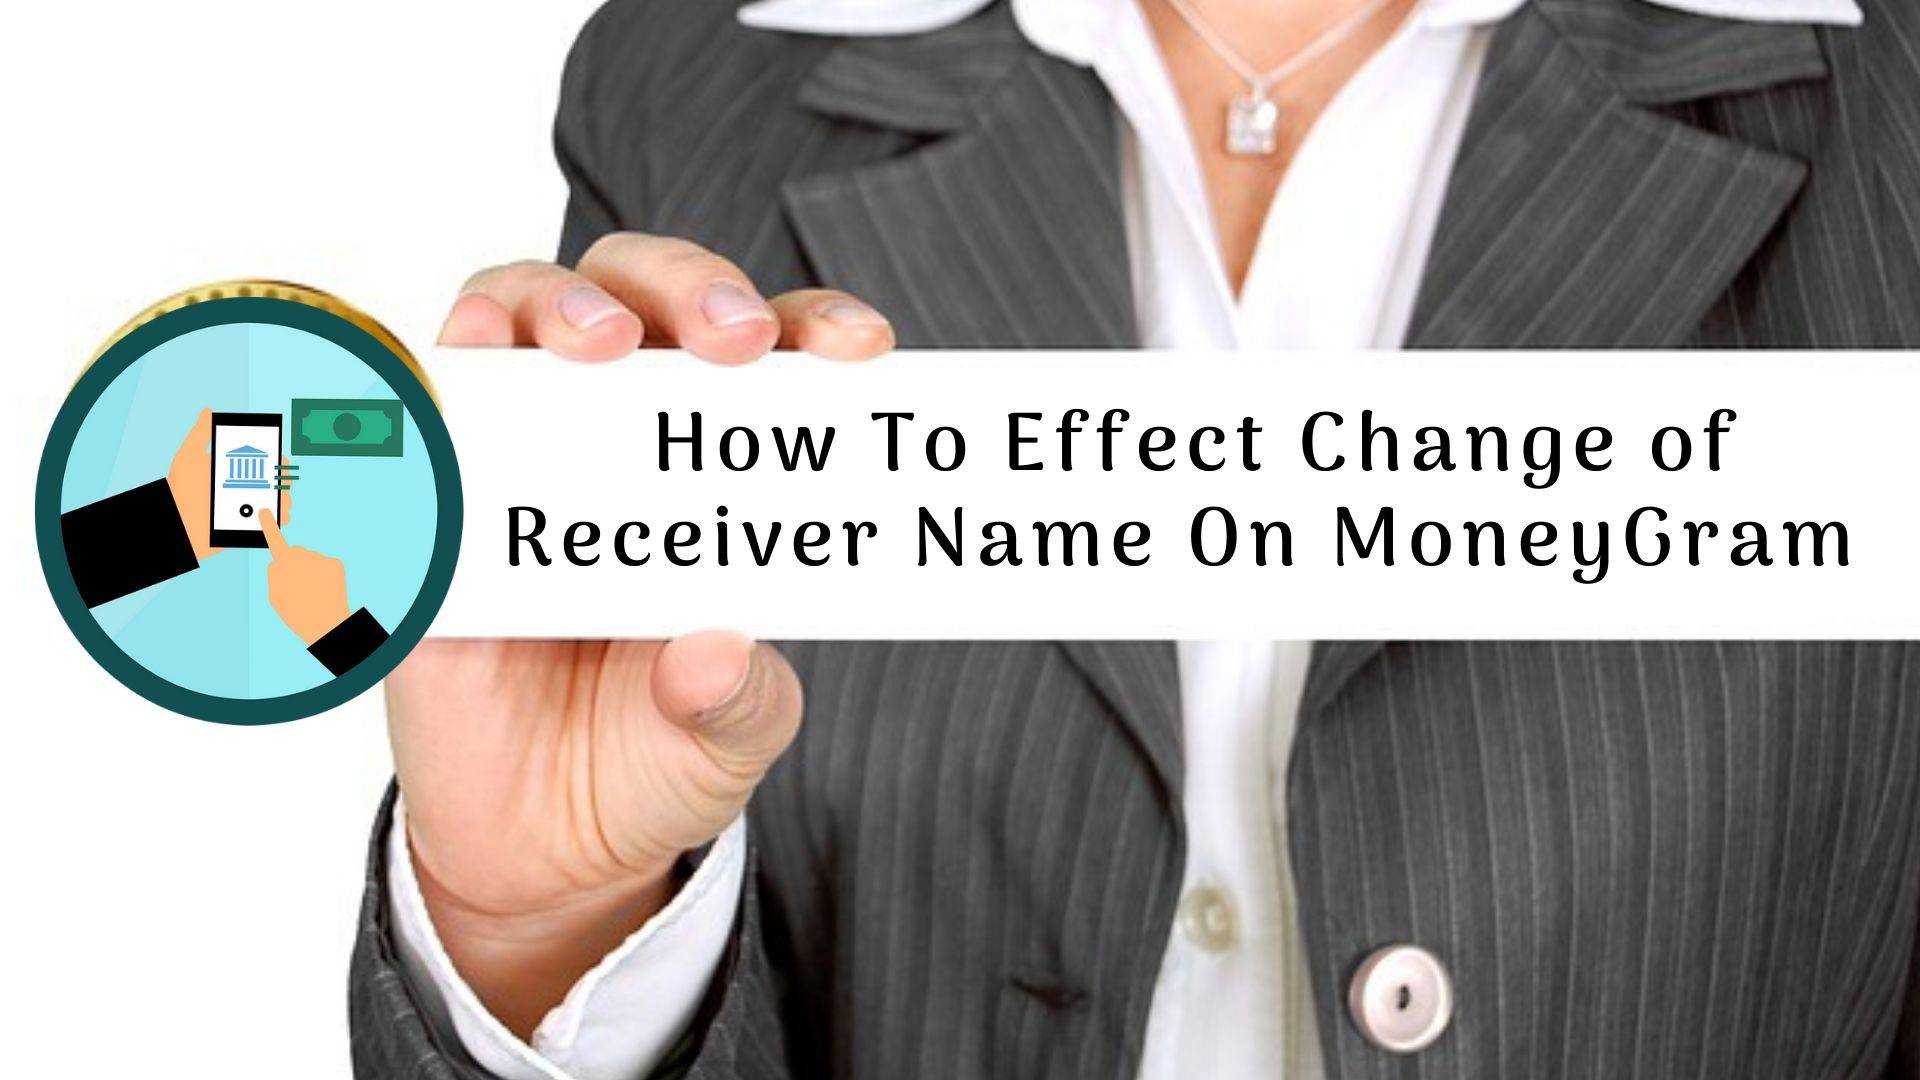 How To Effect Change of Receiver Name On MoneyGram Transaction